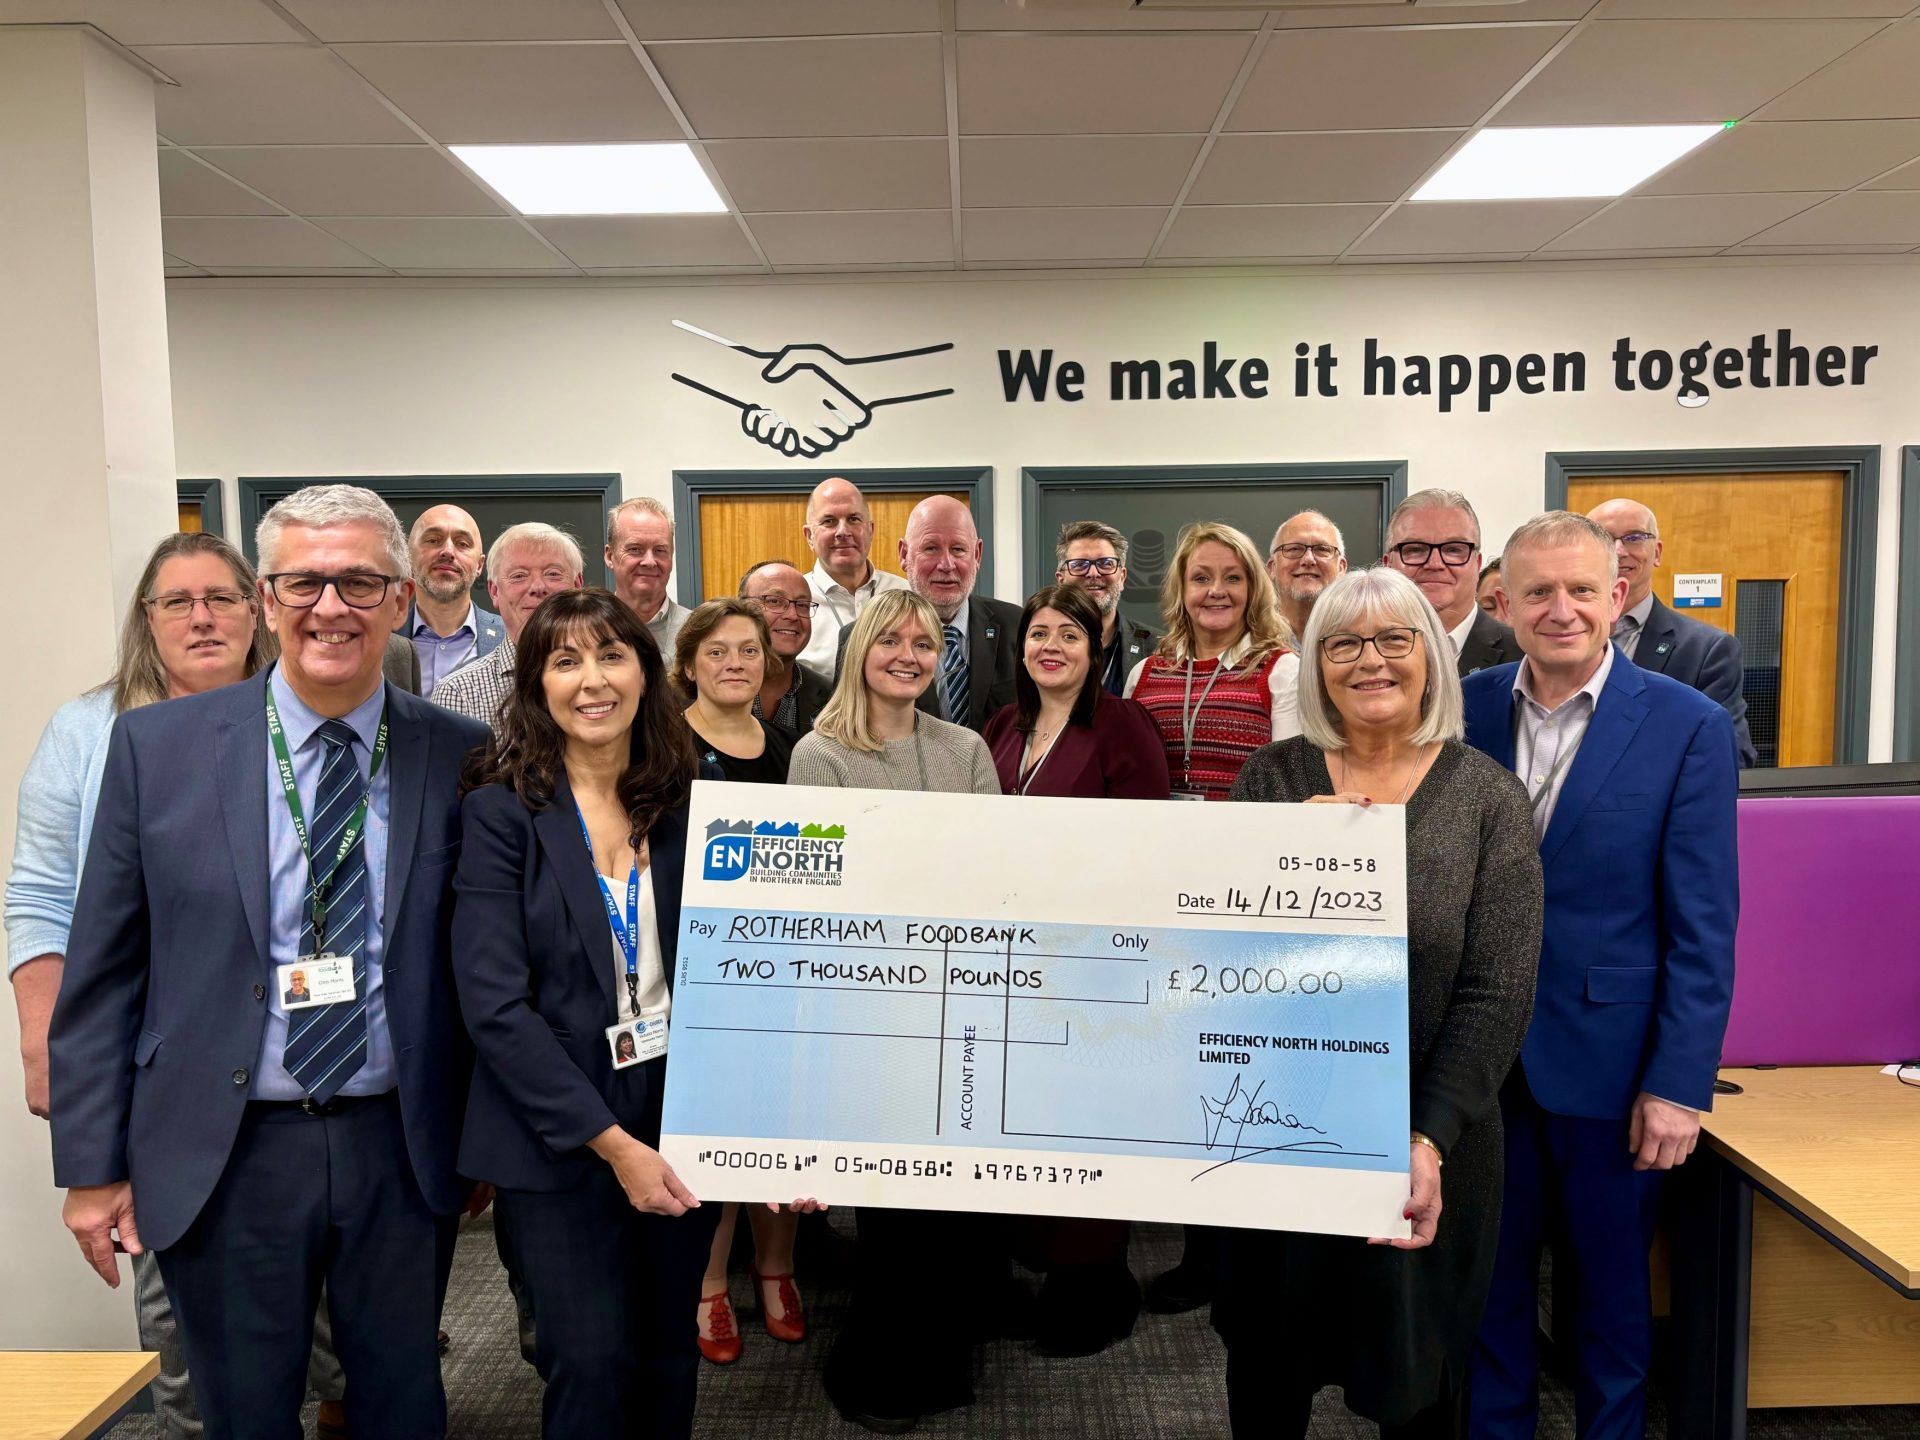 Rotherham Foodbank has received a donation of 2000 from Yorkshire based social housing consortium Efficiency North this Christmas FOODBANKS GET THE BACKING OF HOUSING CONSORTIUM WITH £3K DONATION 